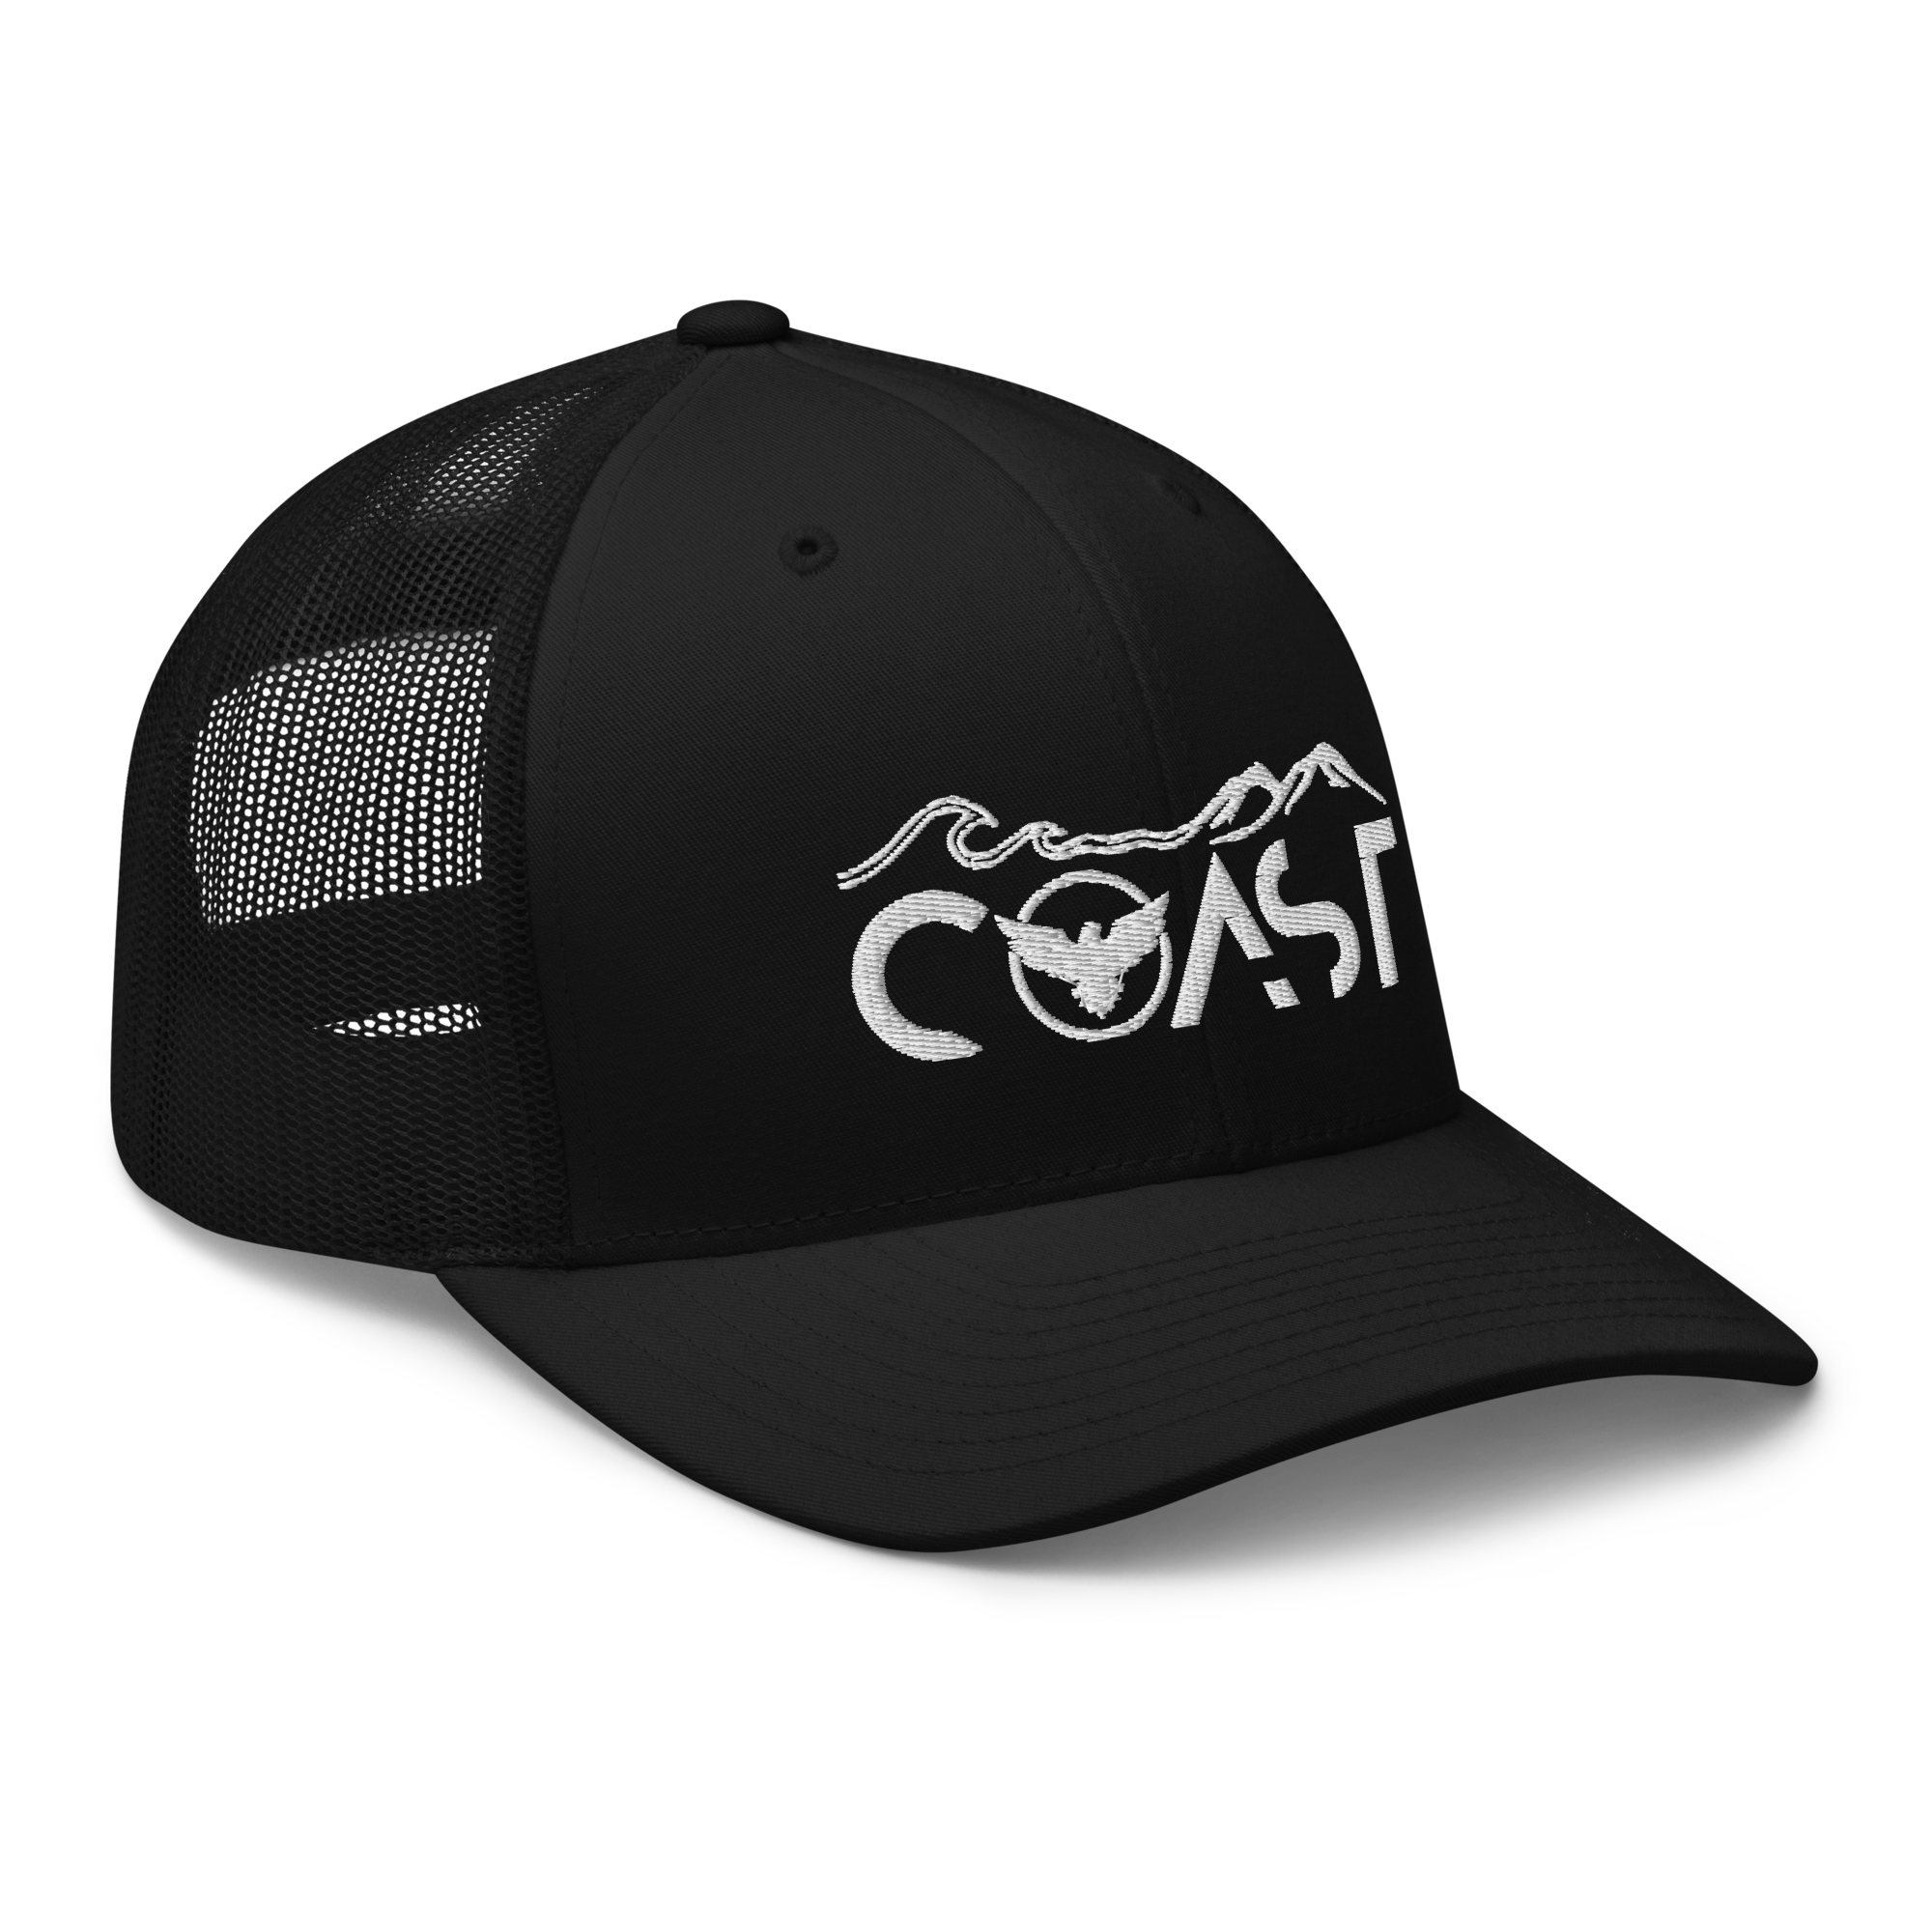 Find Your Coast® Mountains to Coast Trucker Hat